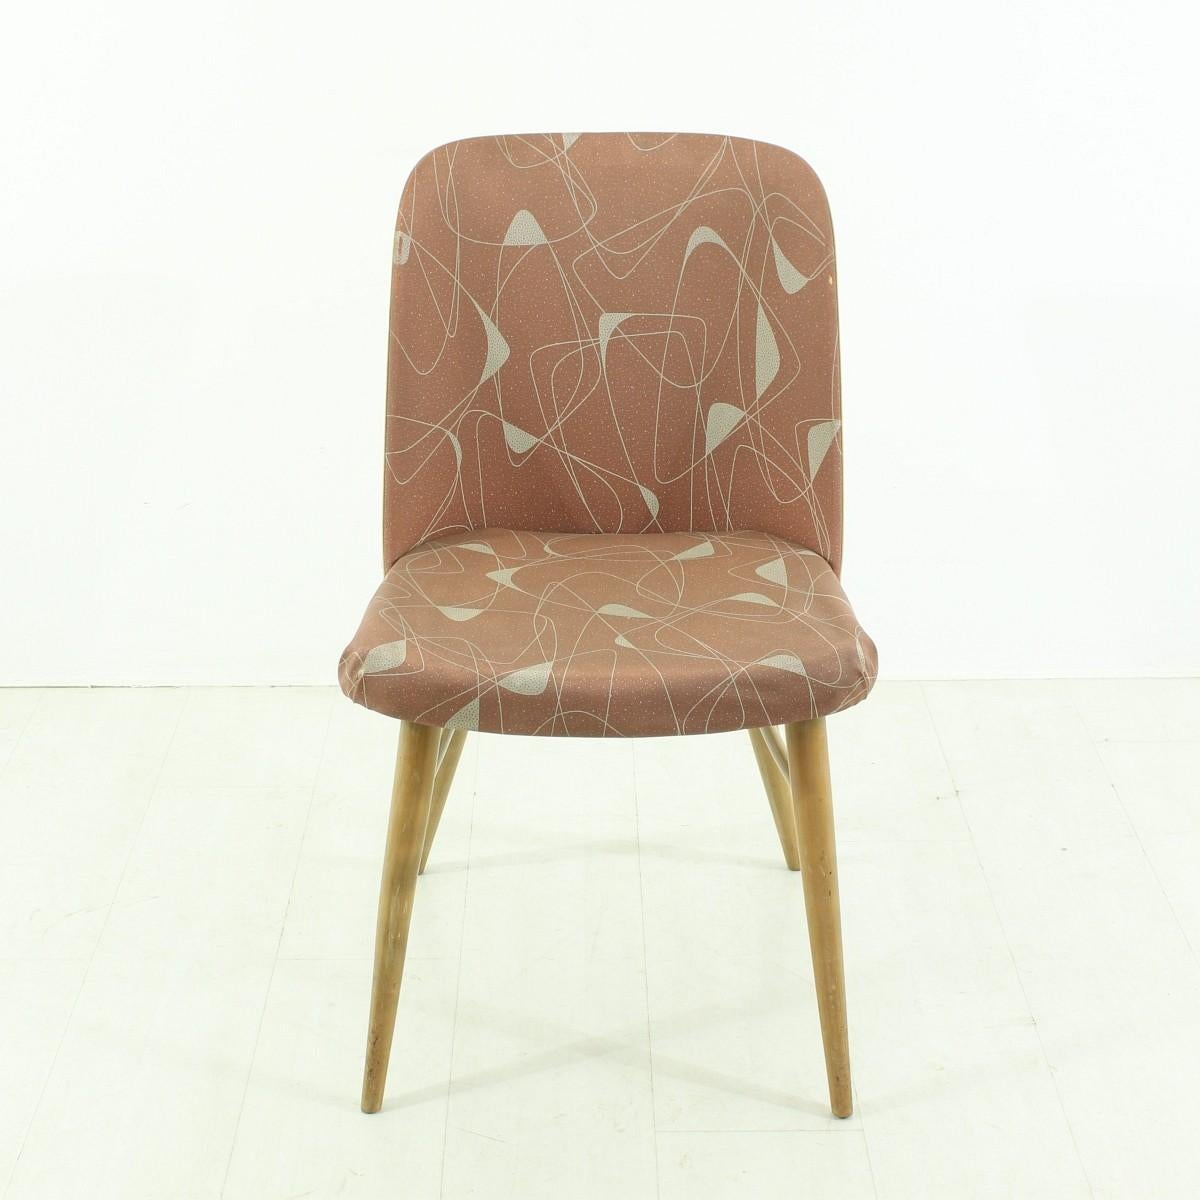 - Remains in good working condition
- Seat not upholstered with foam
- Has a classic 1950s pattern
- Very comfortable chair.